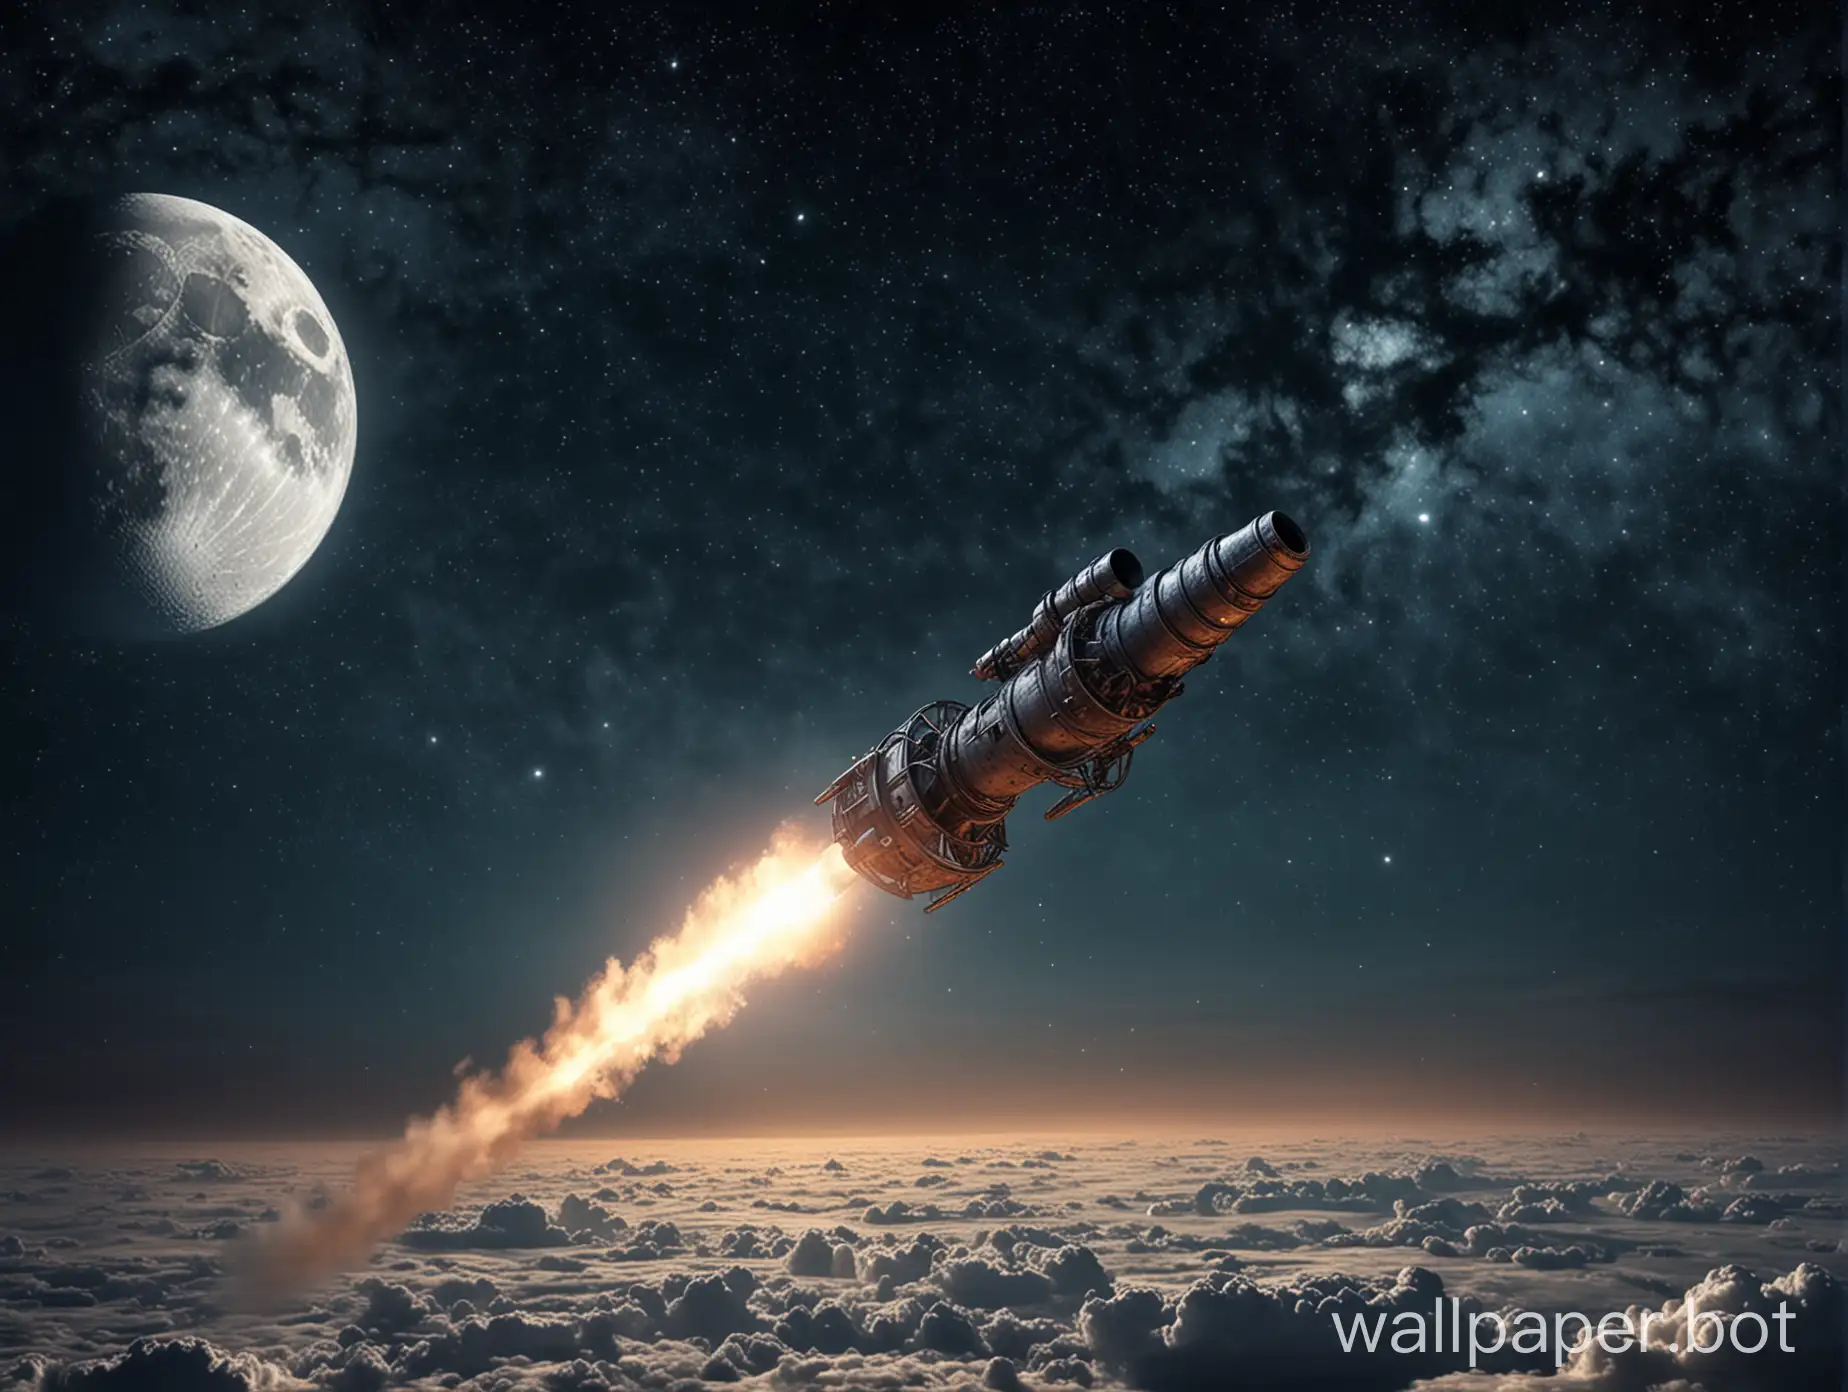 flight from a cannon to the moon in the night sky, in the genre of science fiction